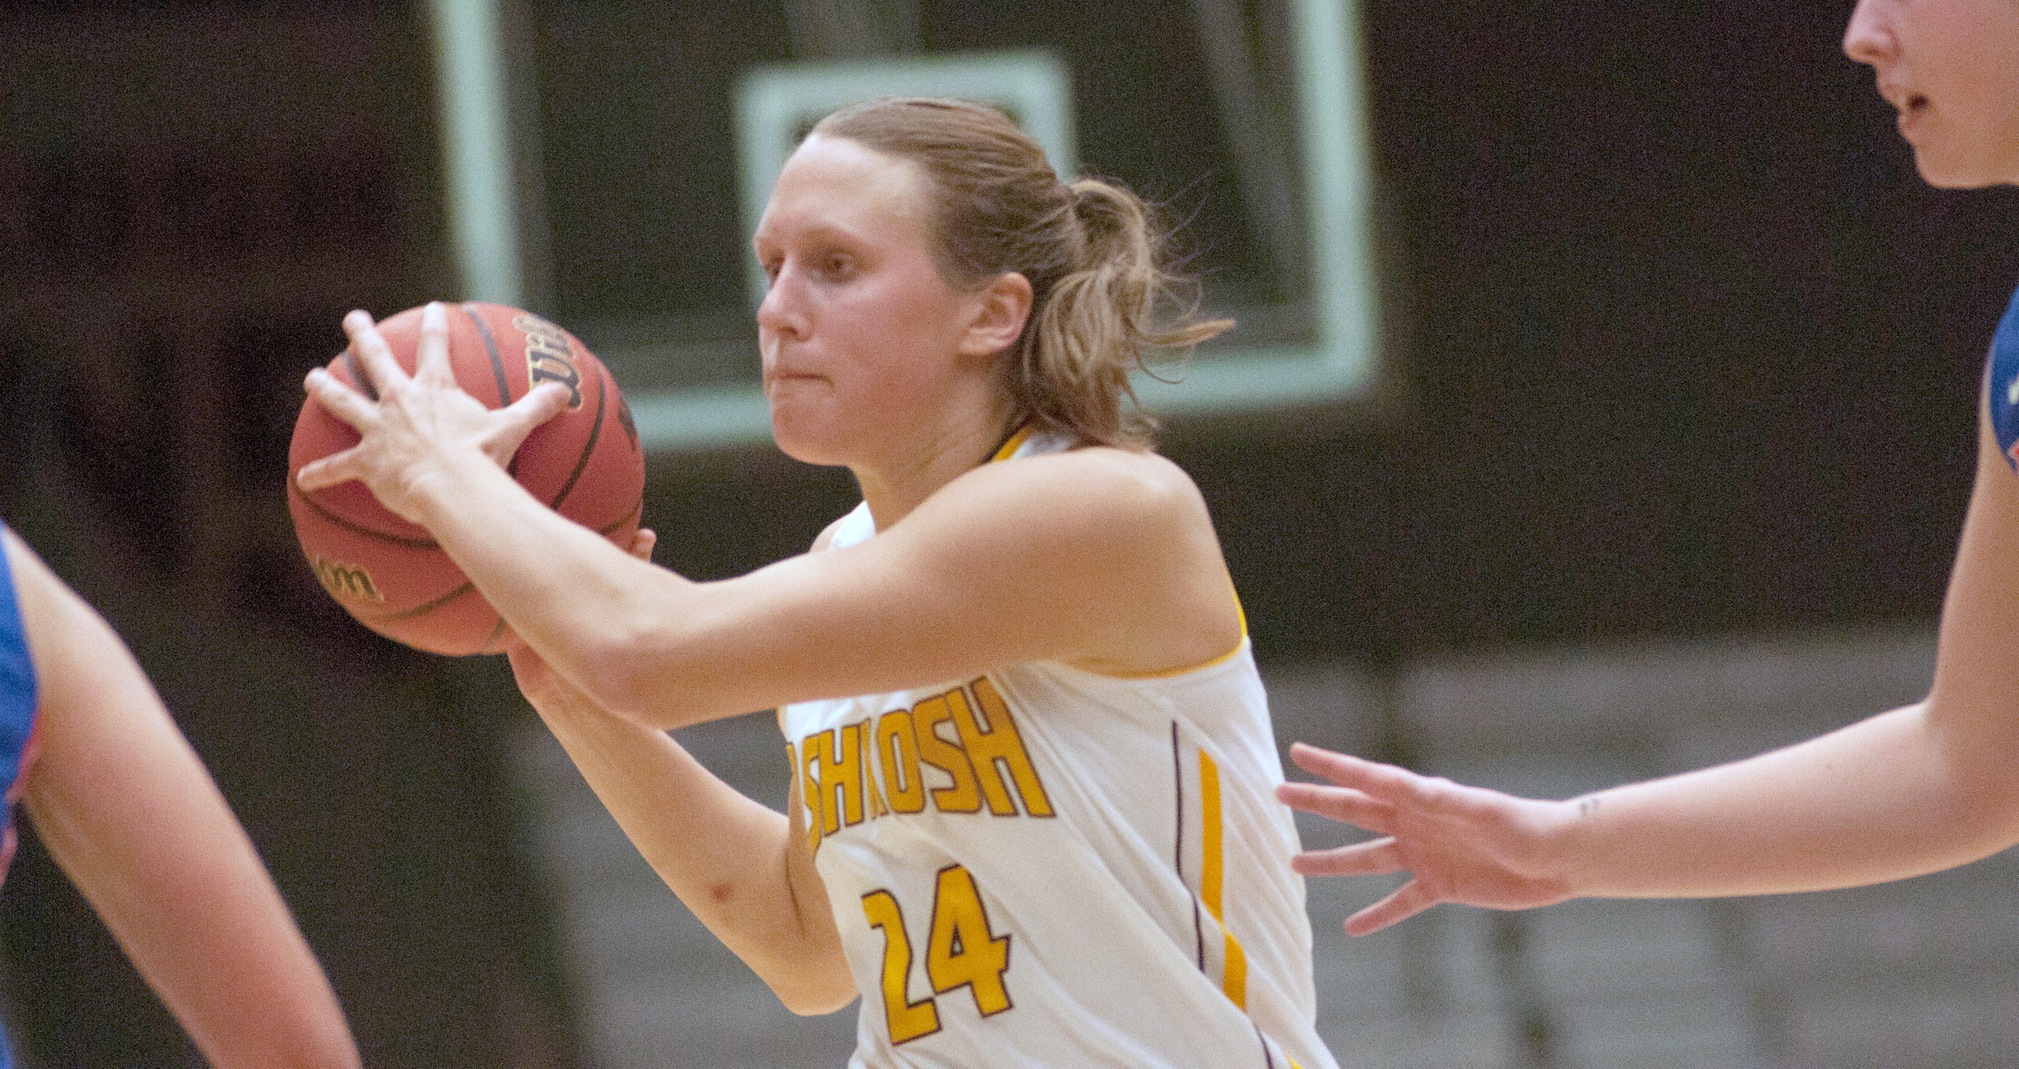 Eliza Campbell scored 19 points and grabbed five rebounds against the Warhawks.